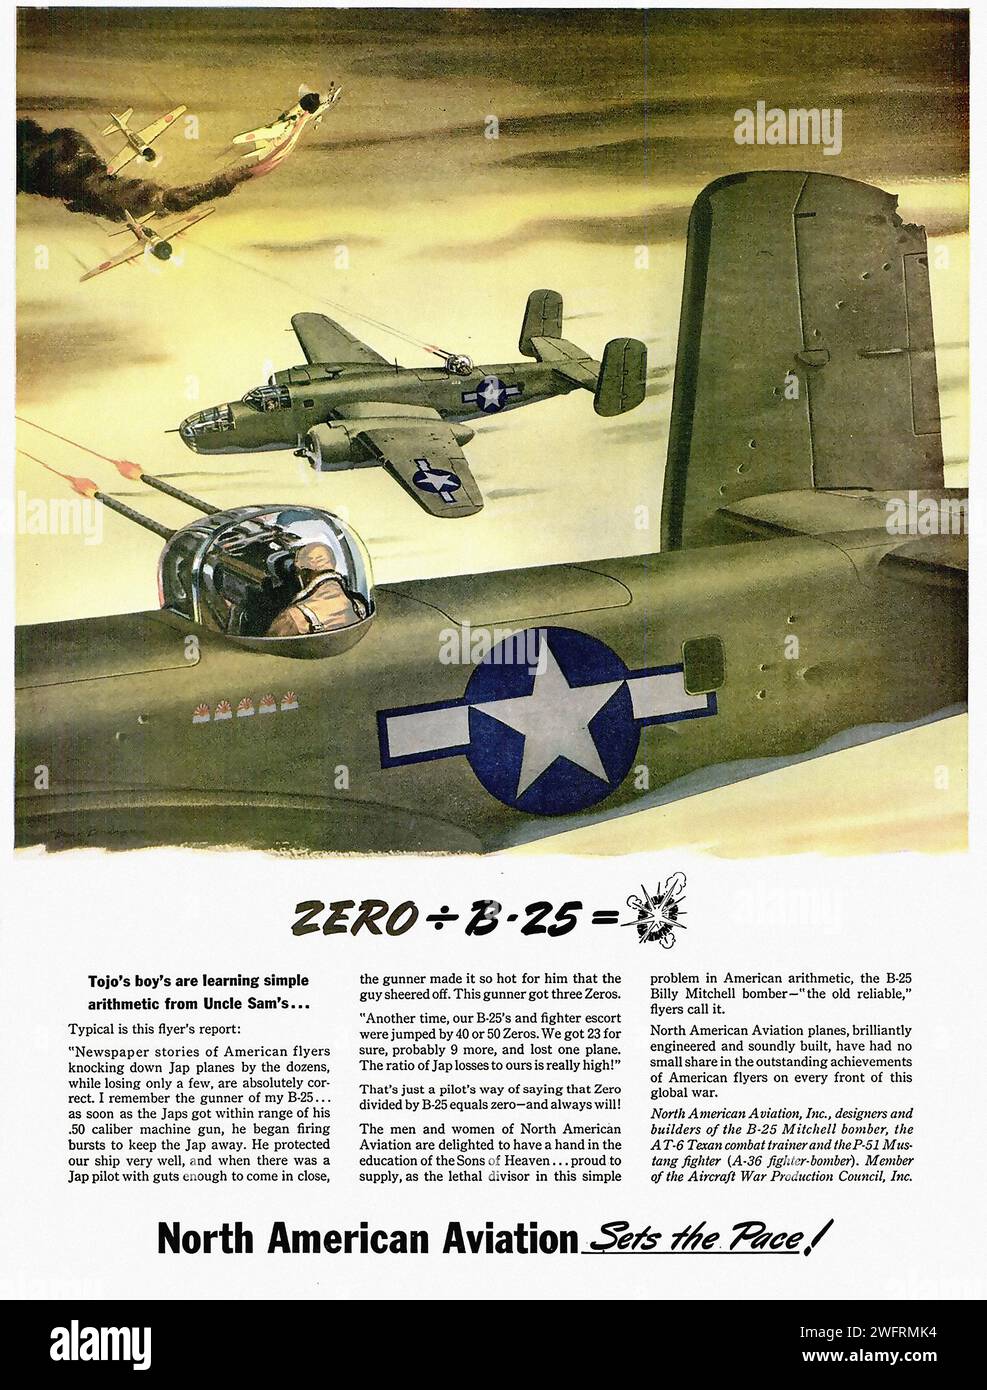 ZERO - B-25 =  Tojo’s boy’s are learning simple arithmetic from Uncle Sam’s…  Typical is this flyer’s report:  “Newspaper stories of American flyers knocking down Jap planes by the dozens, while losing only a few, are absolutely correct. I remember the gunner of my B-25… as soon as the Japs got within range of his .50 caliber machine gun, he began firing bursts to keep the Jap away. He protected our ship very well, and when there was a Jap pilot with guts enough to come in close, the gunner made it so hot for him that the guy sheered off. This gunner got three Zeros.  “Another time, our B-25’s Stock Photo